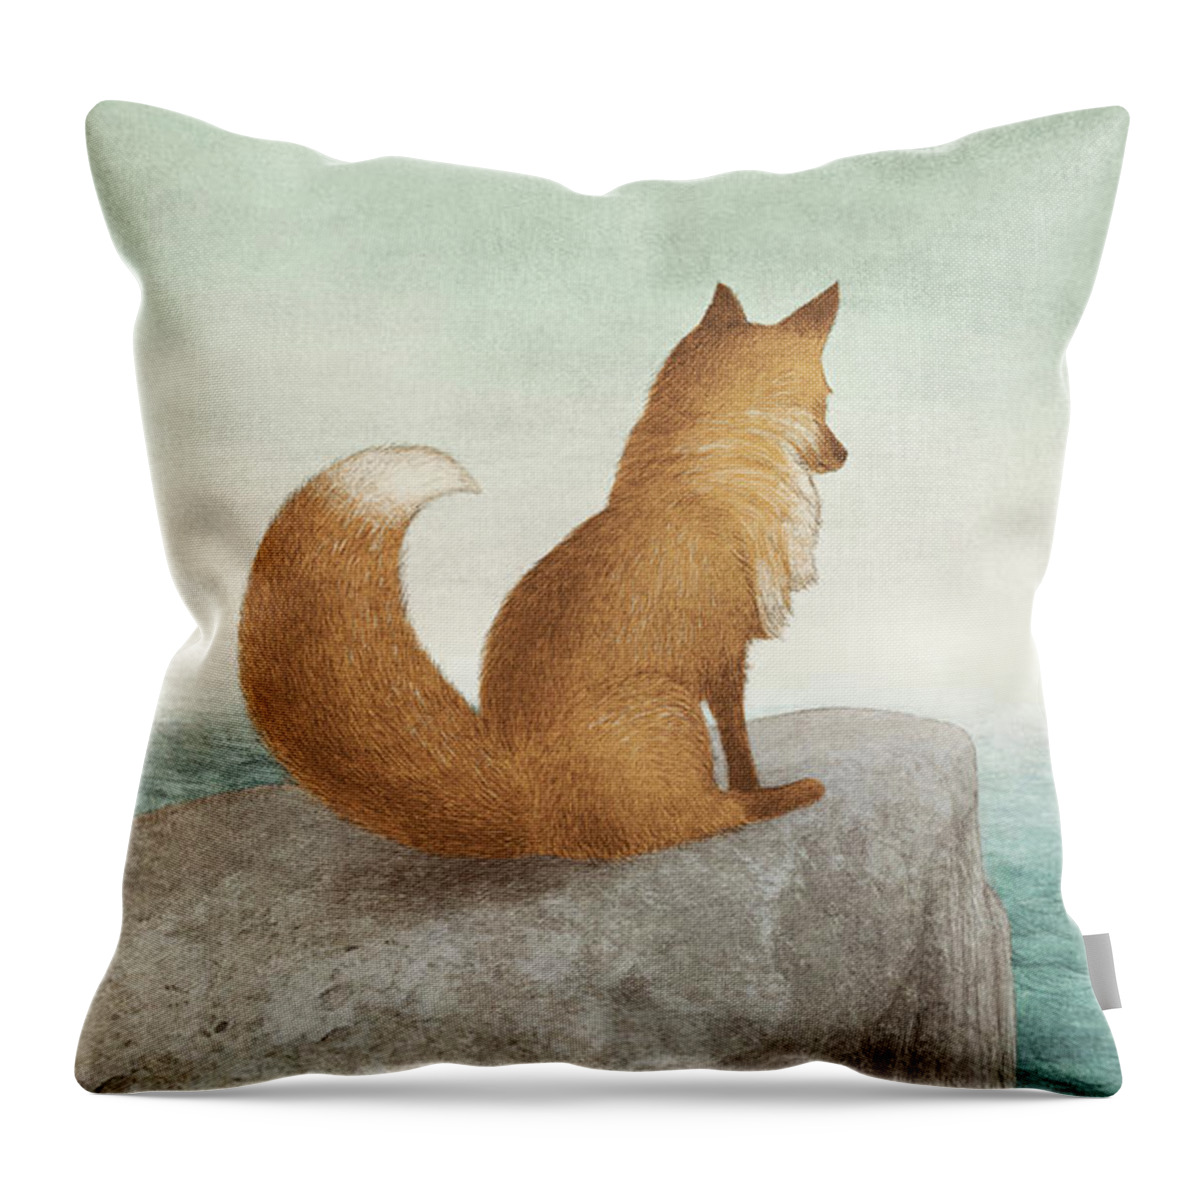 Fox Throw Pillow featuring the drawing The Day the Antlered Ship Arrived by Eric Fan